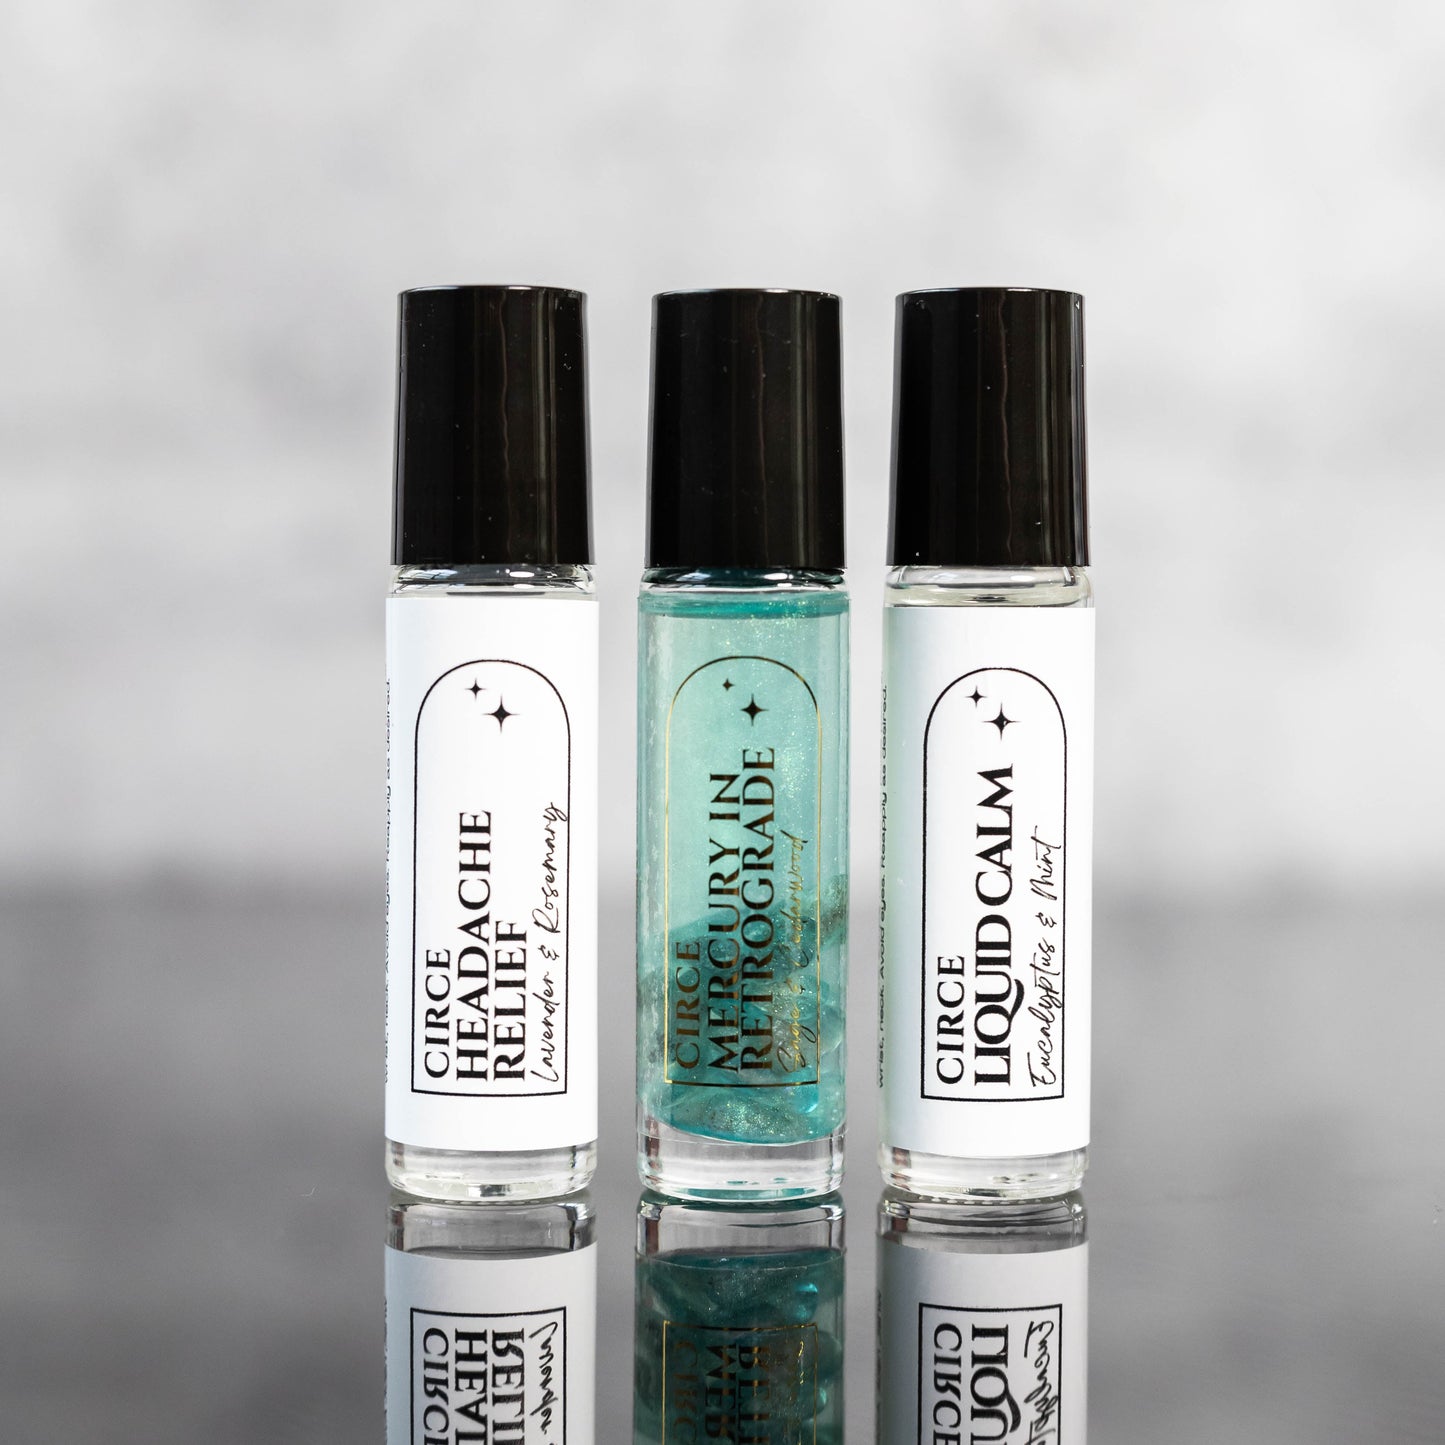 Liquid Calm Aromatherapy Oil Roller by CIRCE  from Circe Boutique